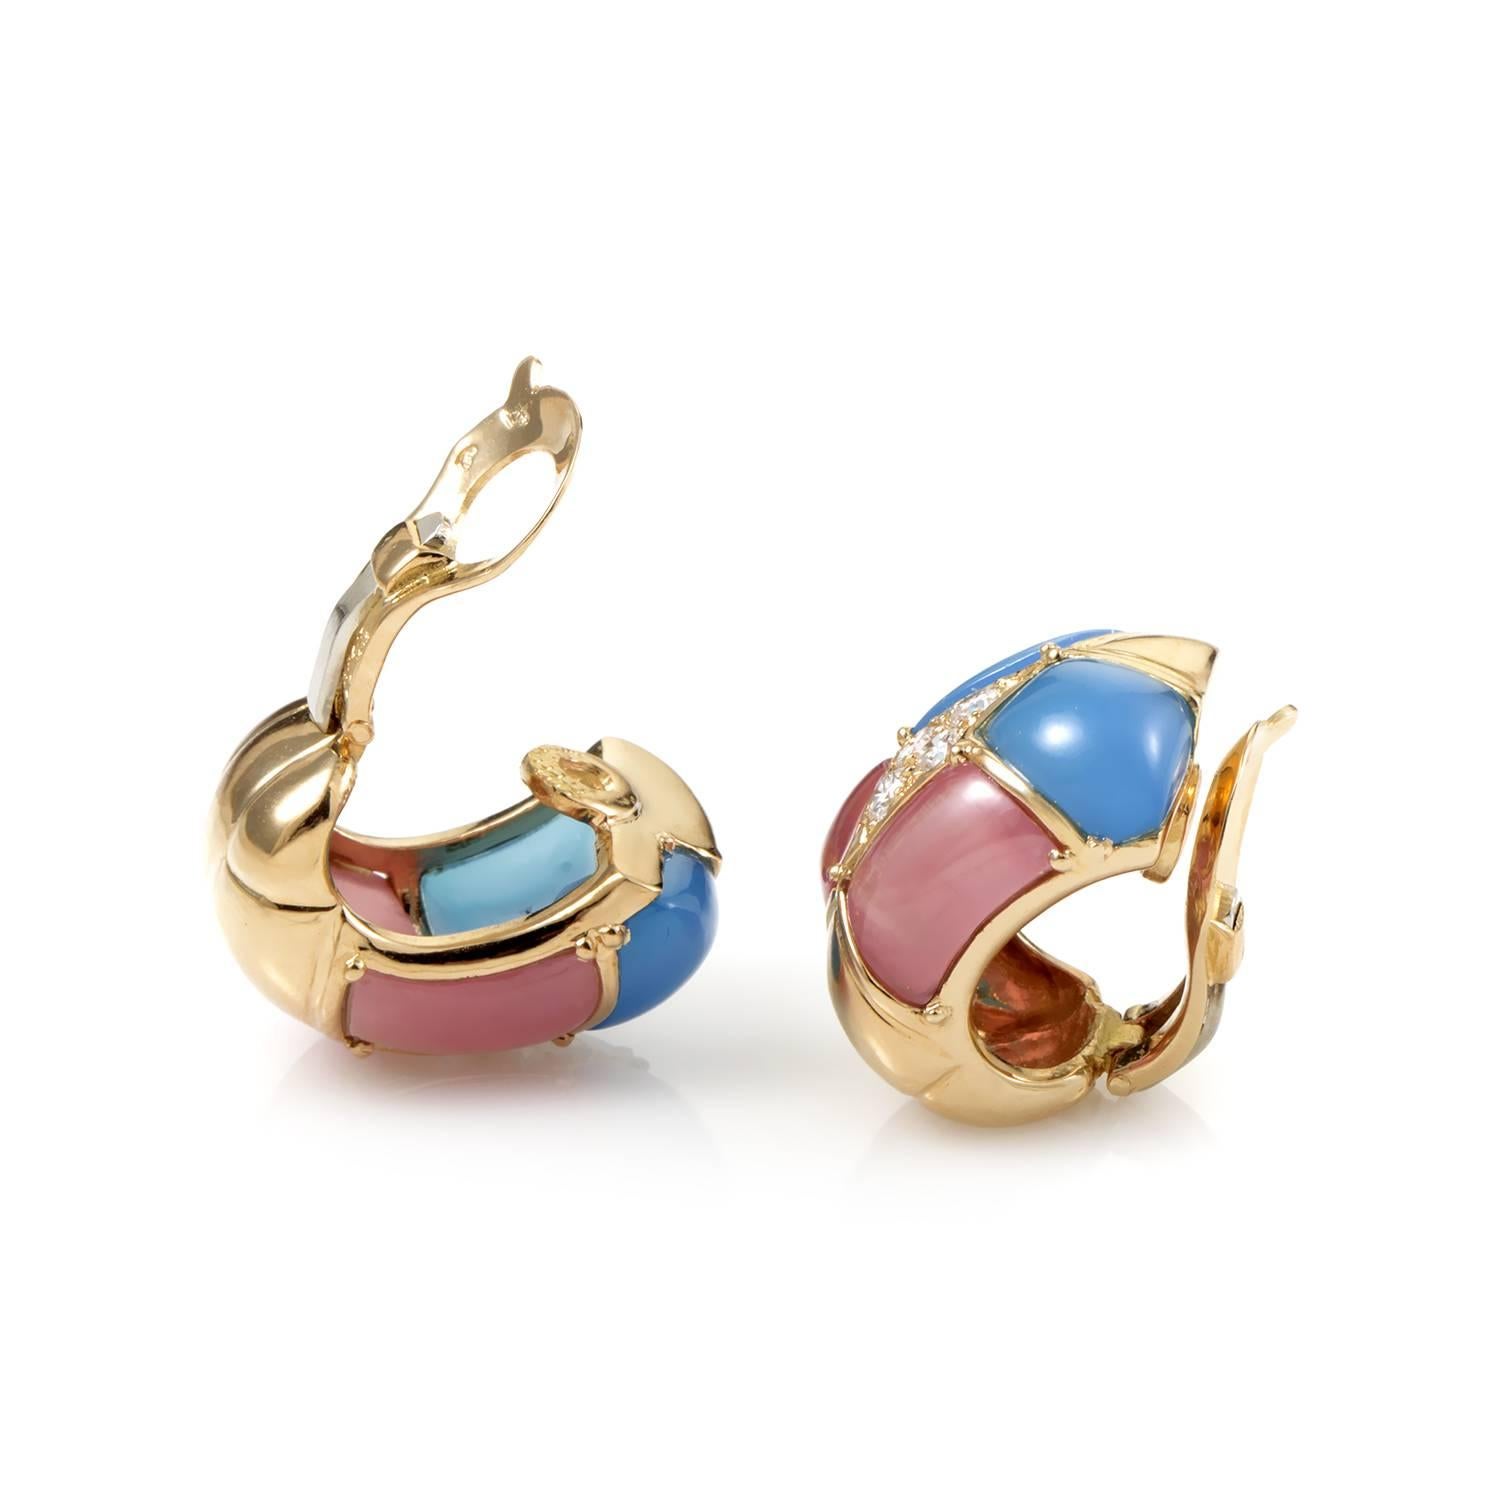 Tastefully combining contrasting nuances of splendid blue and lovely pink jade for a vivacious visual effect, Van Cleef & Arpels present these adorable earrings made of prestigious 18K yellow gold and embellished with delicately glistening diamonds